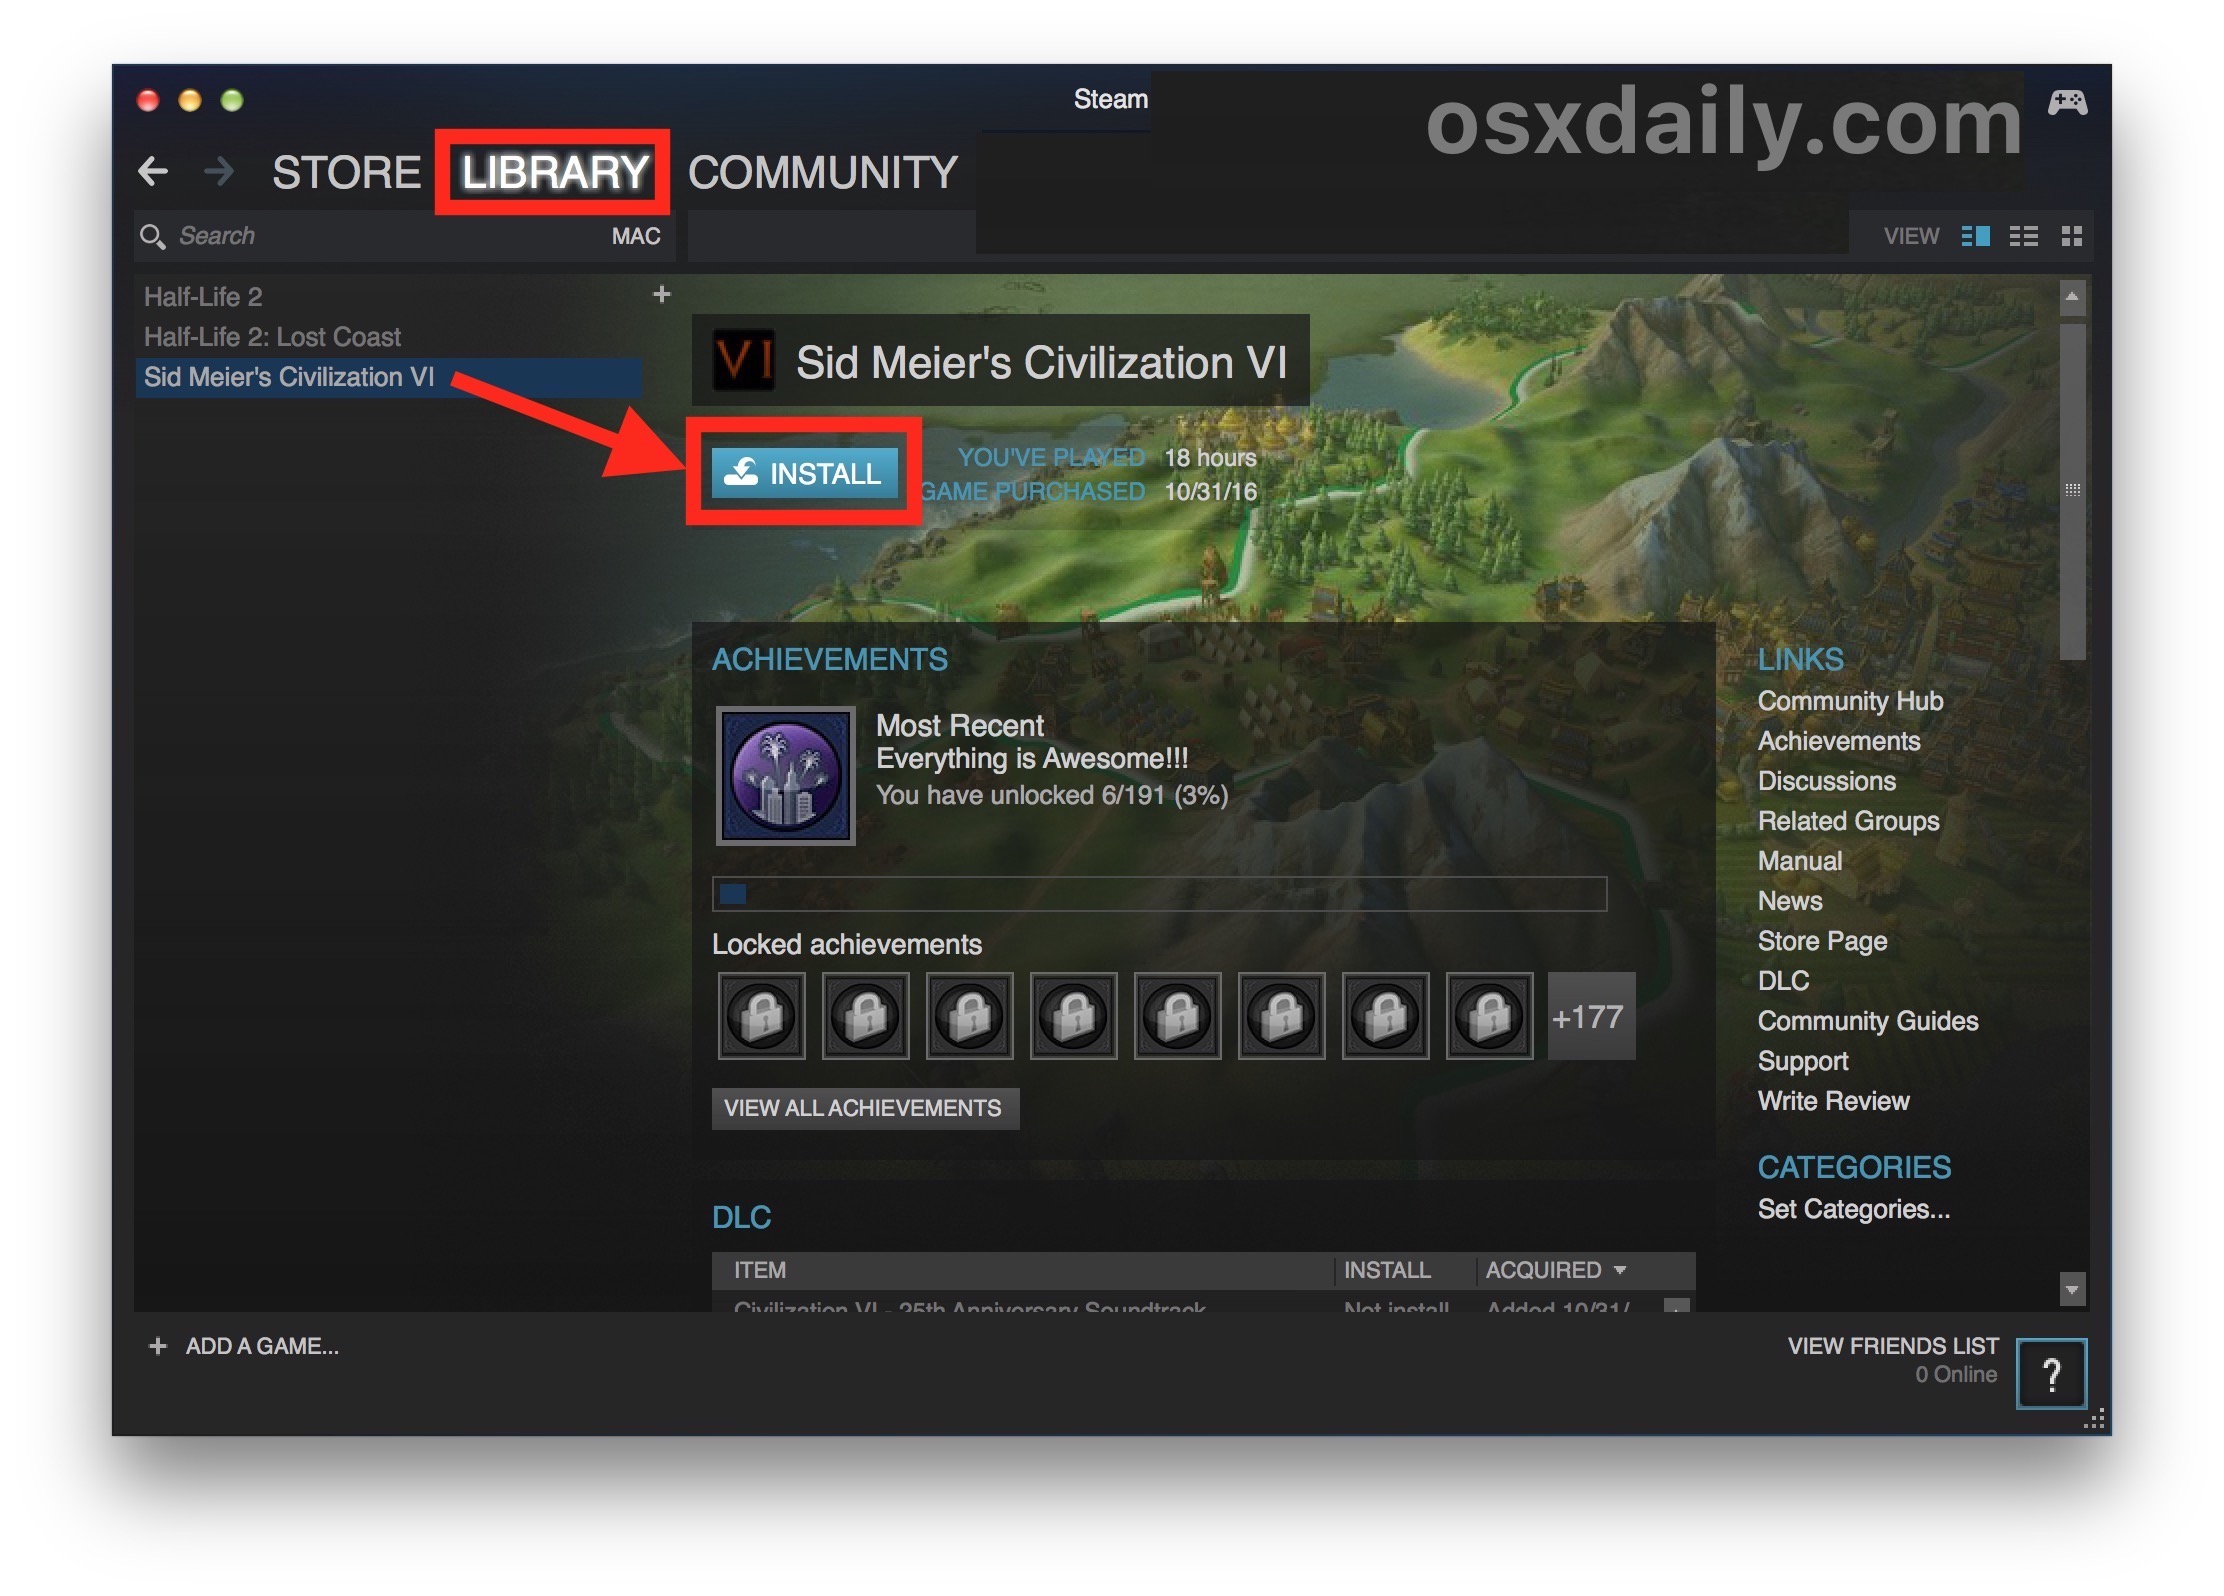 How to reinstall Steam games 